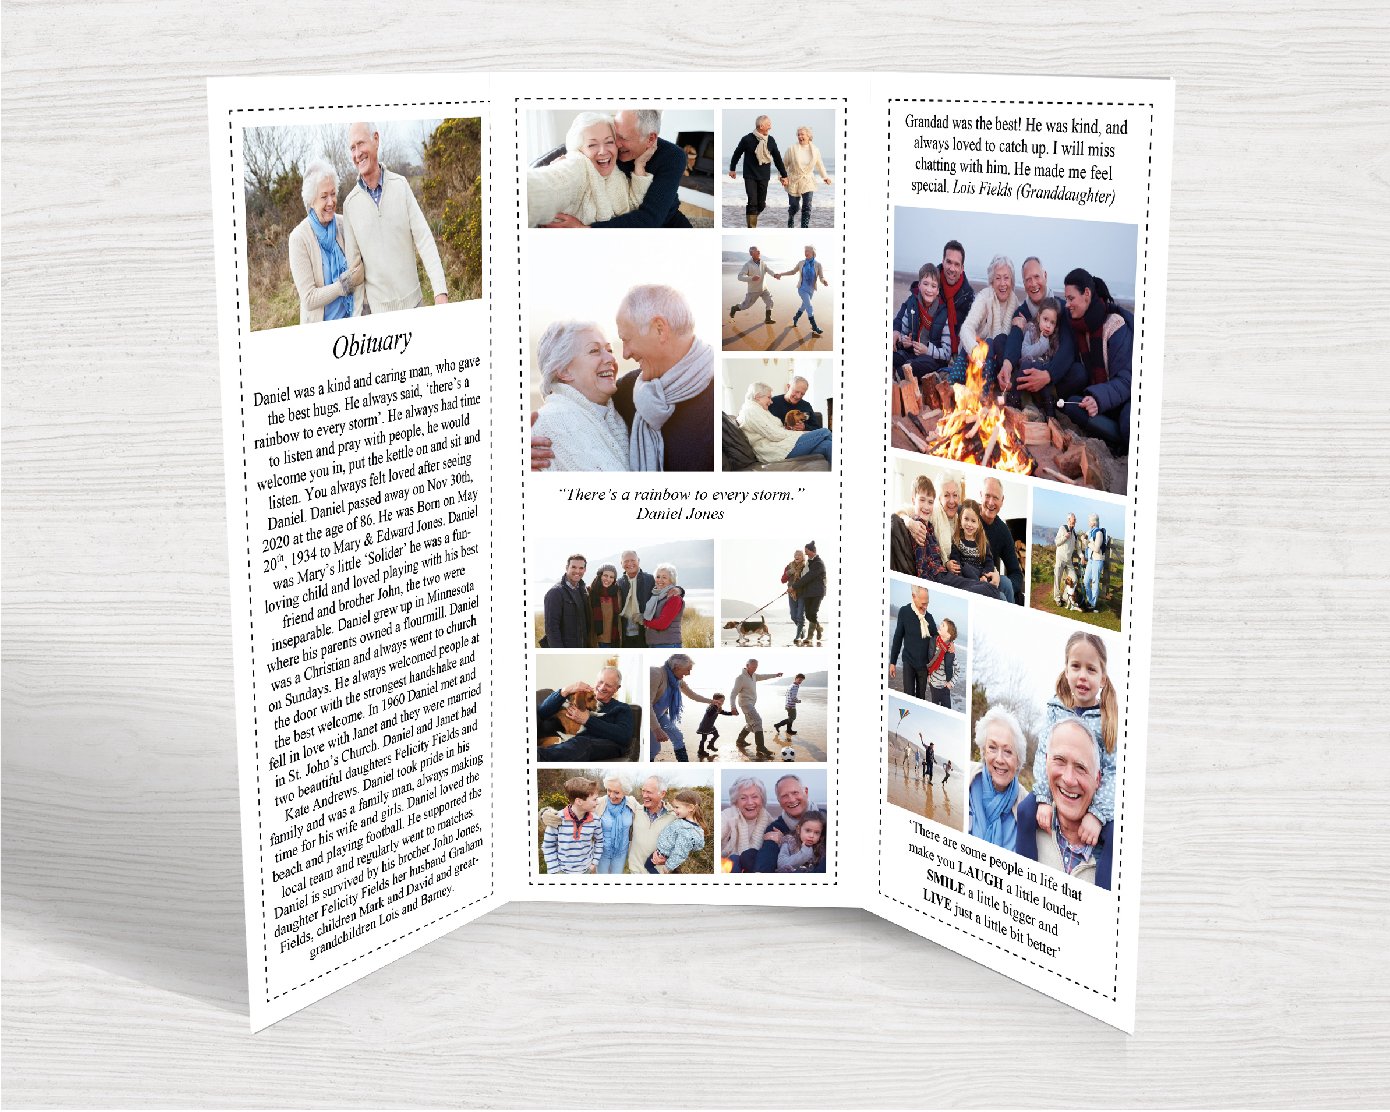 Trifold Classic Funeral Program Template